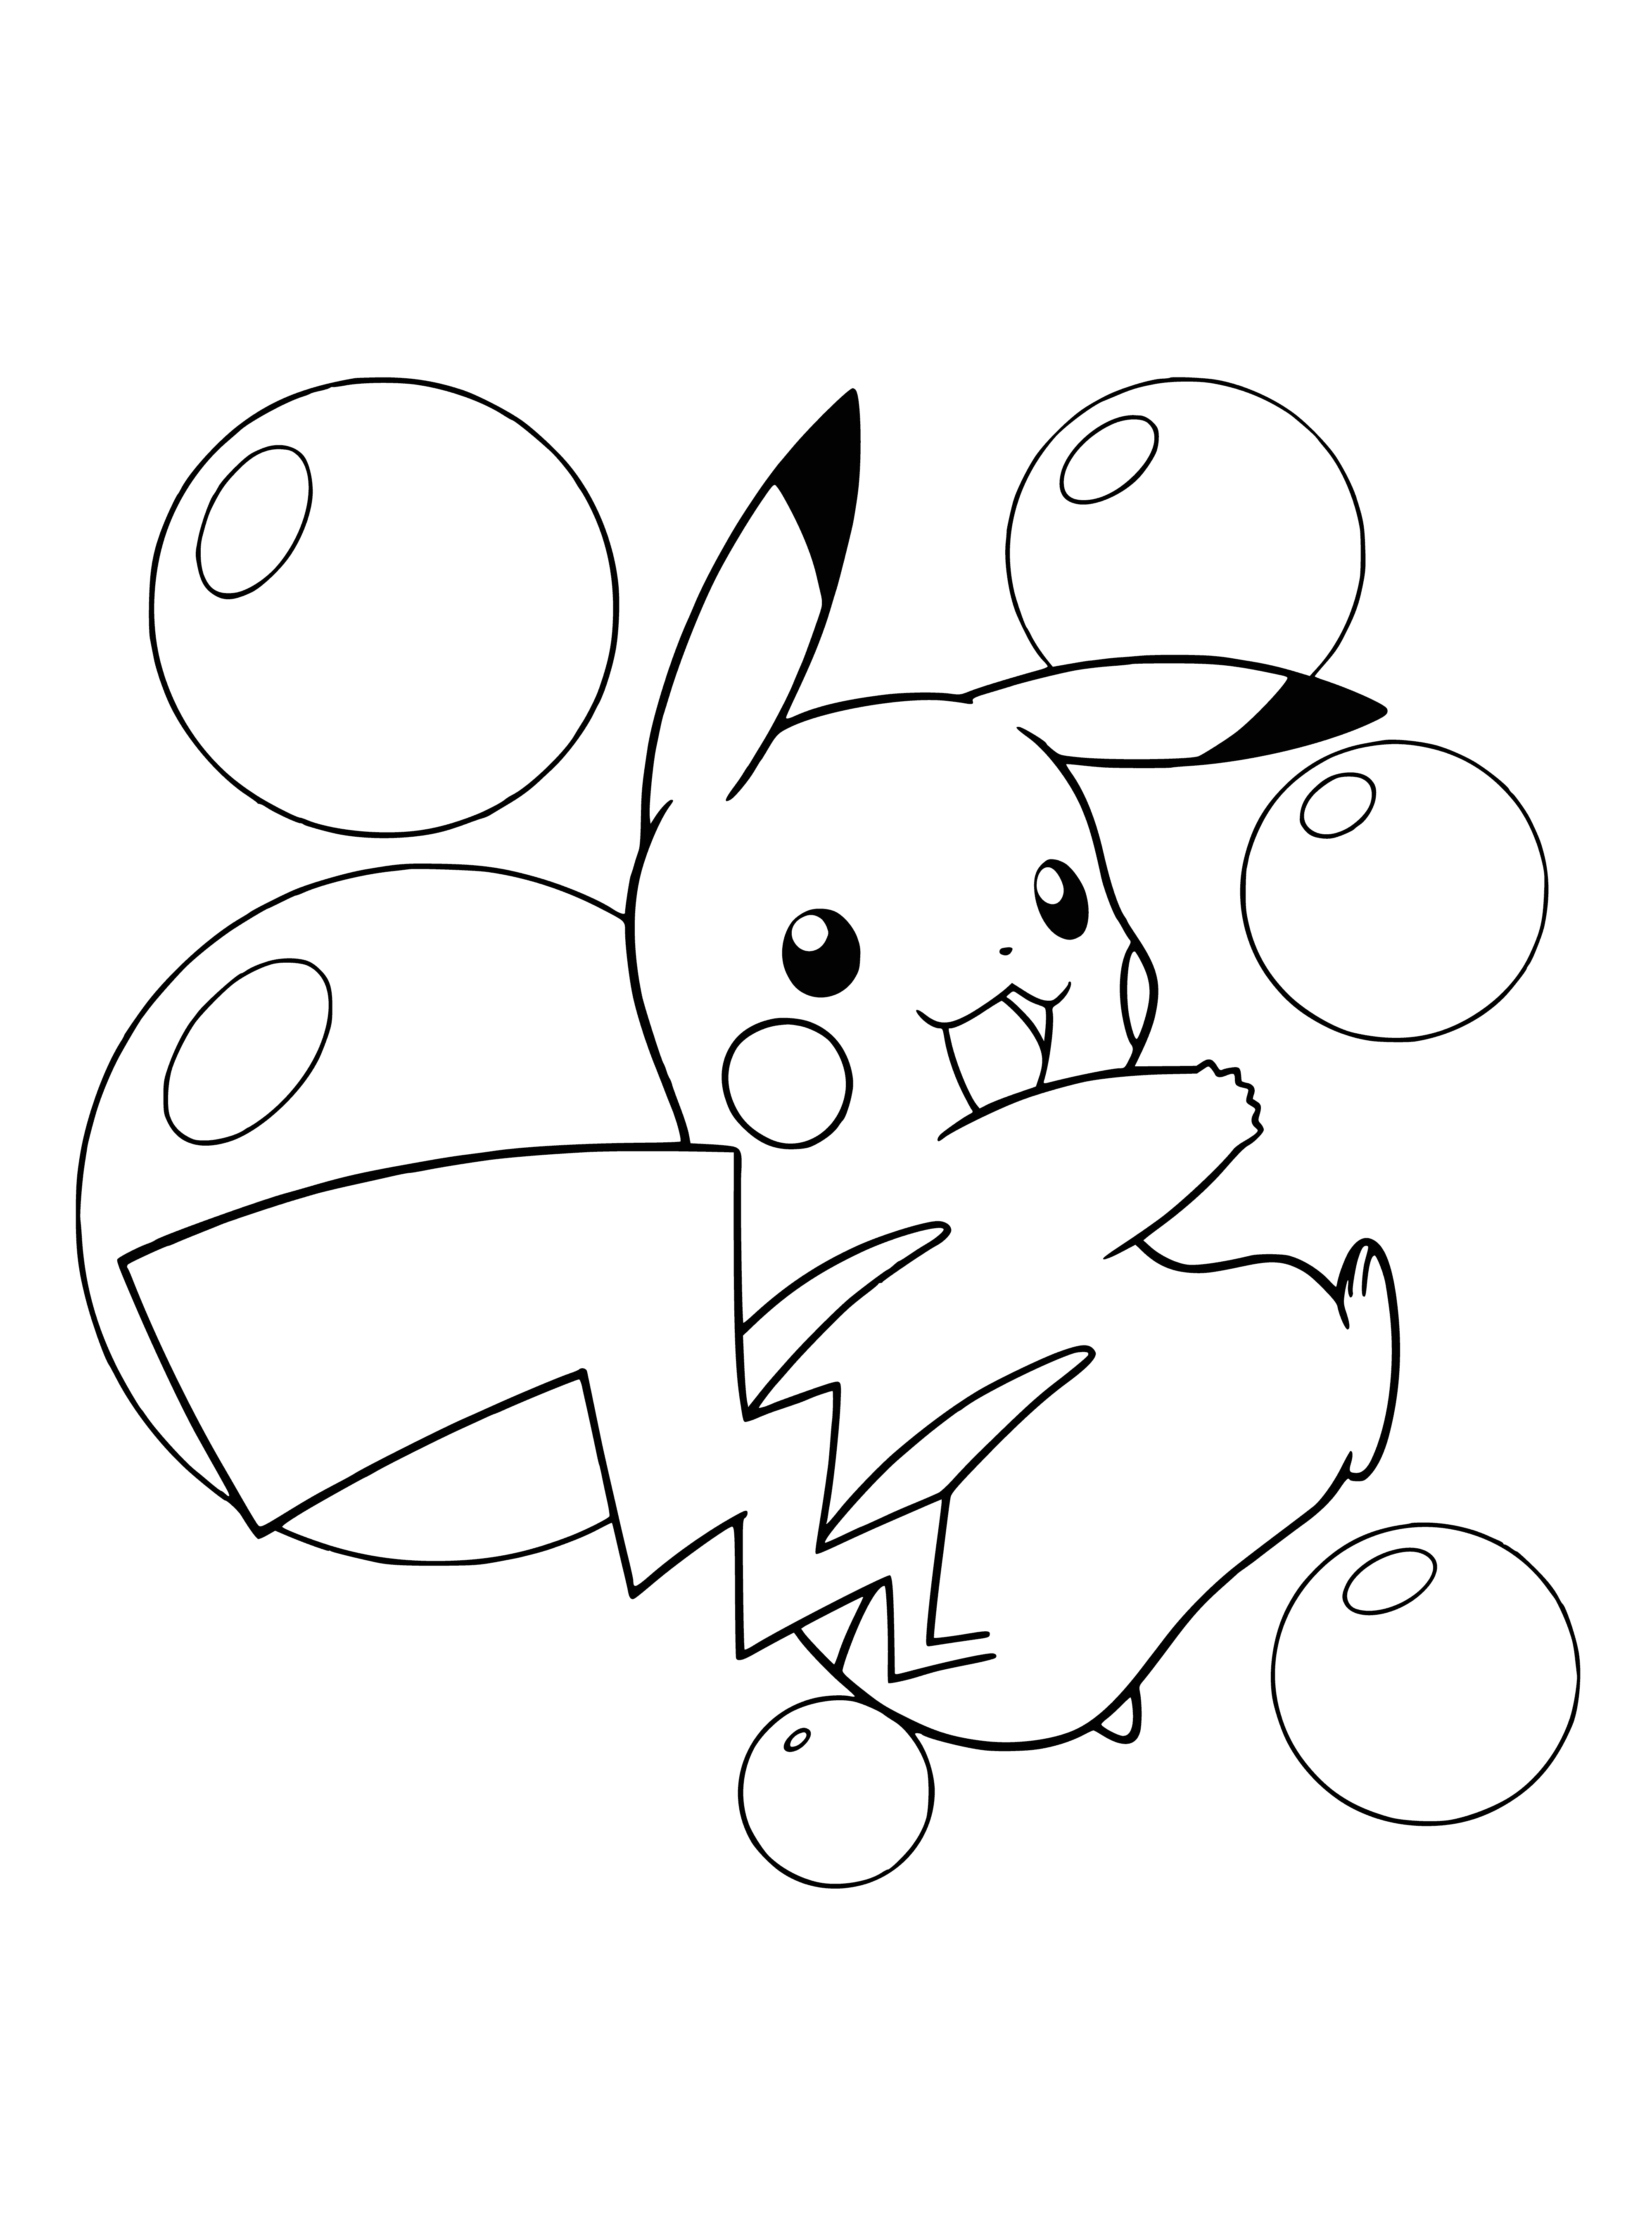 coloring page: A Pikachu—yellow with black stripes, red mark on cheek, small eyes, long & thin tail in shape of lightning bolt—stands on two legs.